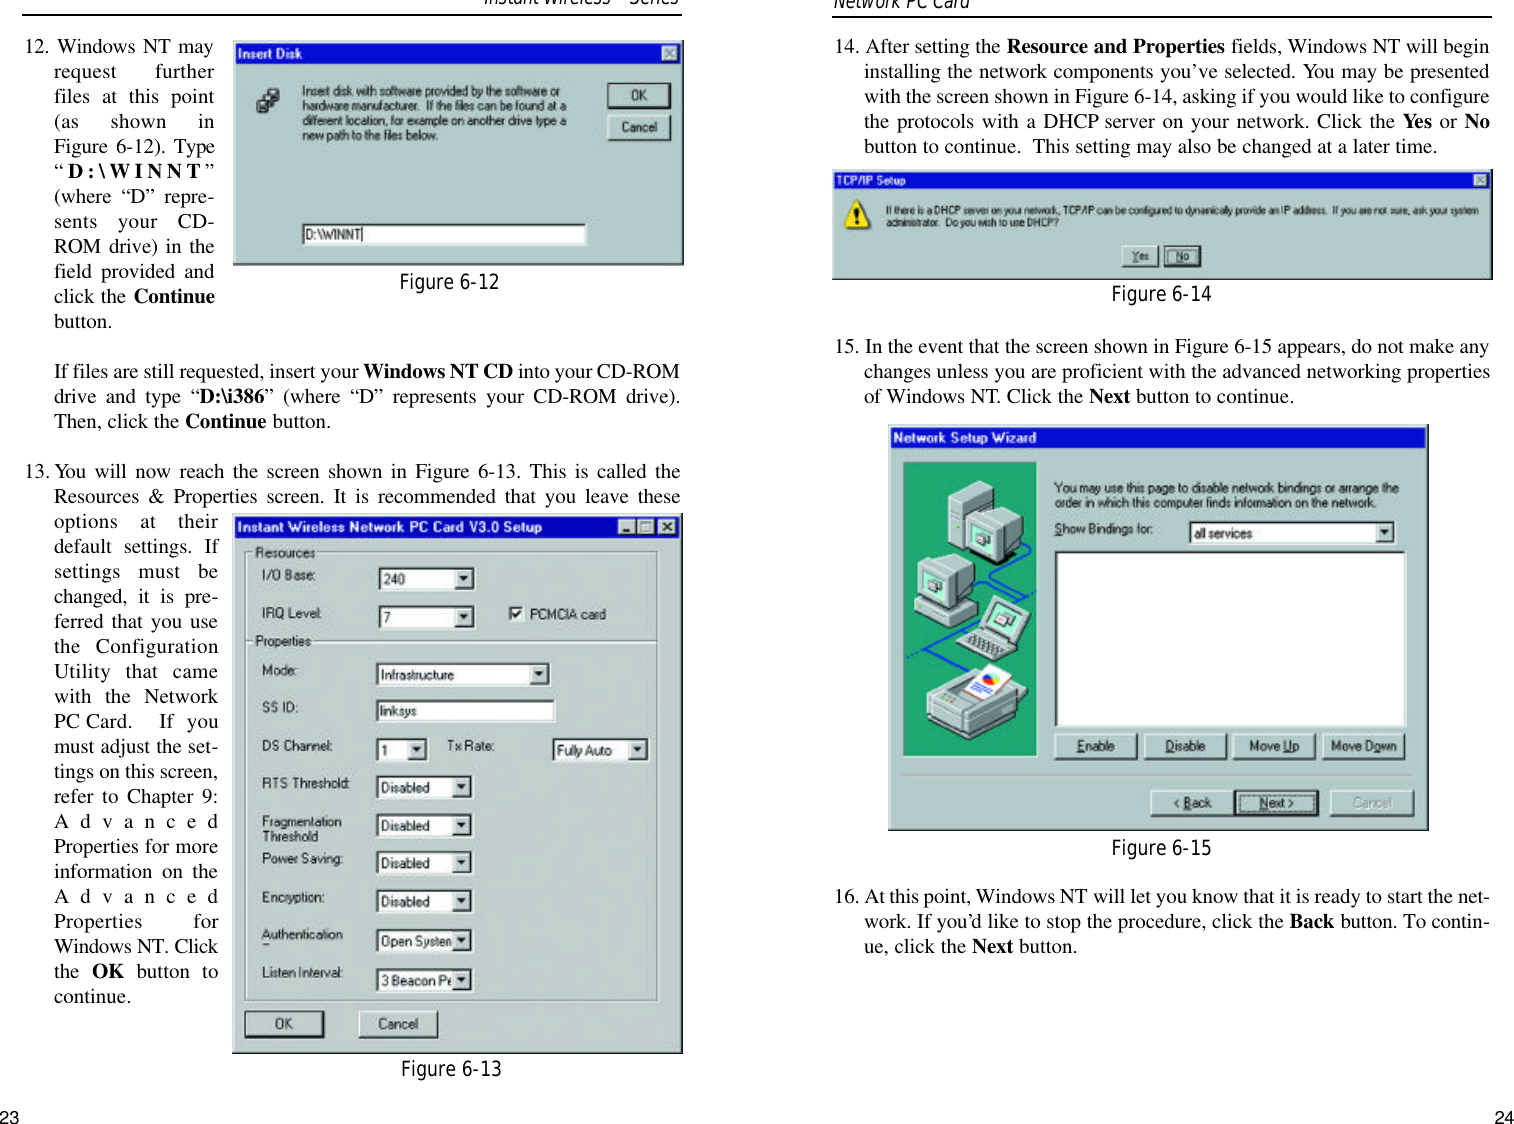 14. After setting the Resource and Properties fields, Windows NT will begininstalling the network components you’ve selected. You may be presentedwith the screen shown in Figure 6-14, asking if you would like to configurethe protocols with a DHCP server on your network. Click the Yes or Nobutton to continue.  This setting may also be changed at a later time.15. In the event that the screen shown in Figure 6-15 appears, do not make anychanges unless you are proficient with the advanced networking propertiesof Windows NT. Click the Next button to continue.16. At this point, Windows NT will let you know that it is ready to start the net-work. If you’d like to stop the procedure, click the Back button. To contin-ue, click the Next button.Figure 6-14Figure 6-1512. Windows NT mayrequest furtherfiles at this point(as shown inFigure 6-12). Type“D:\WINNT”(where “D” repre-sents your CD-ROM drive) in thefield provided andclick the Continuebutton. If files are still requested, insert your Windows NT CD into your CD-ROMdrive and type “D:\i386” (where “D” represents your CD-ROM drive).Then, click the Continue button.13. You will now reach the screen shown in Figure 6-13. This is called theResources &amp; Properties screen. It is recommended that you leave theseoptions at theirdefault settings. Ifsettings must bechanged, it is pre-ferred that you usethe ConfigurationUtility that camewith the NetworkPC Card.  If youmust adjust the set-tings on this screen,refer to Chapter 9:AdvancedProperties for moreinformation on theAdvancedProperties forWindows NT. Clickthe  OK button tocontinue.Network PC Card Figure 6-12Figure 6-13Instant WirelessSeries23 24